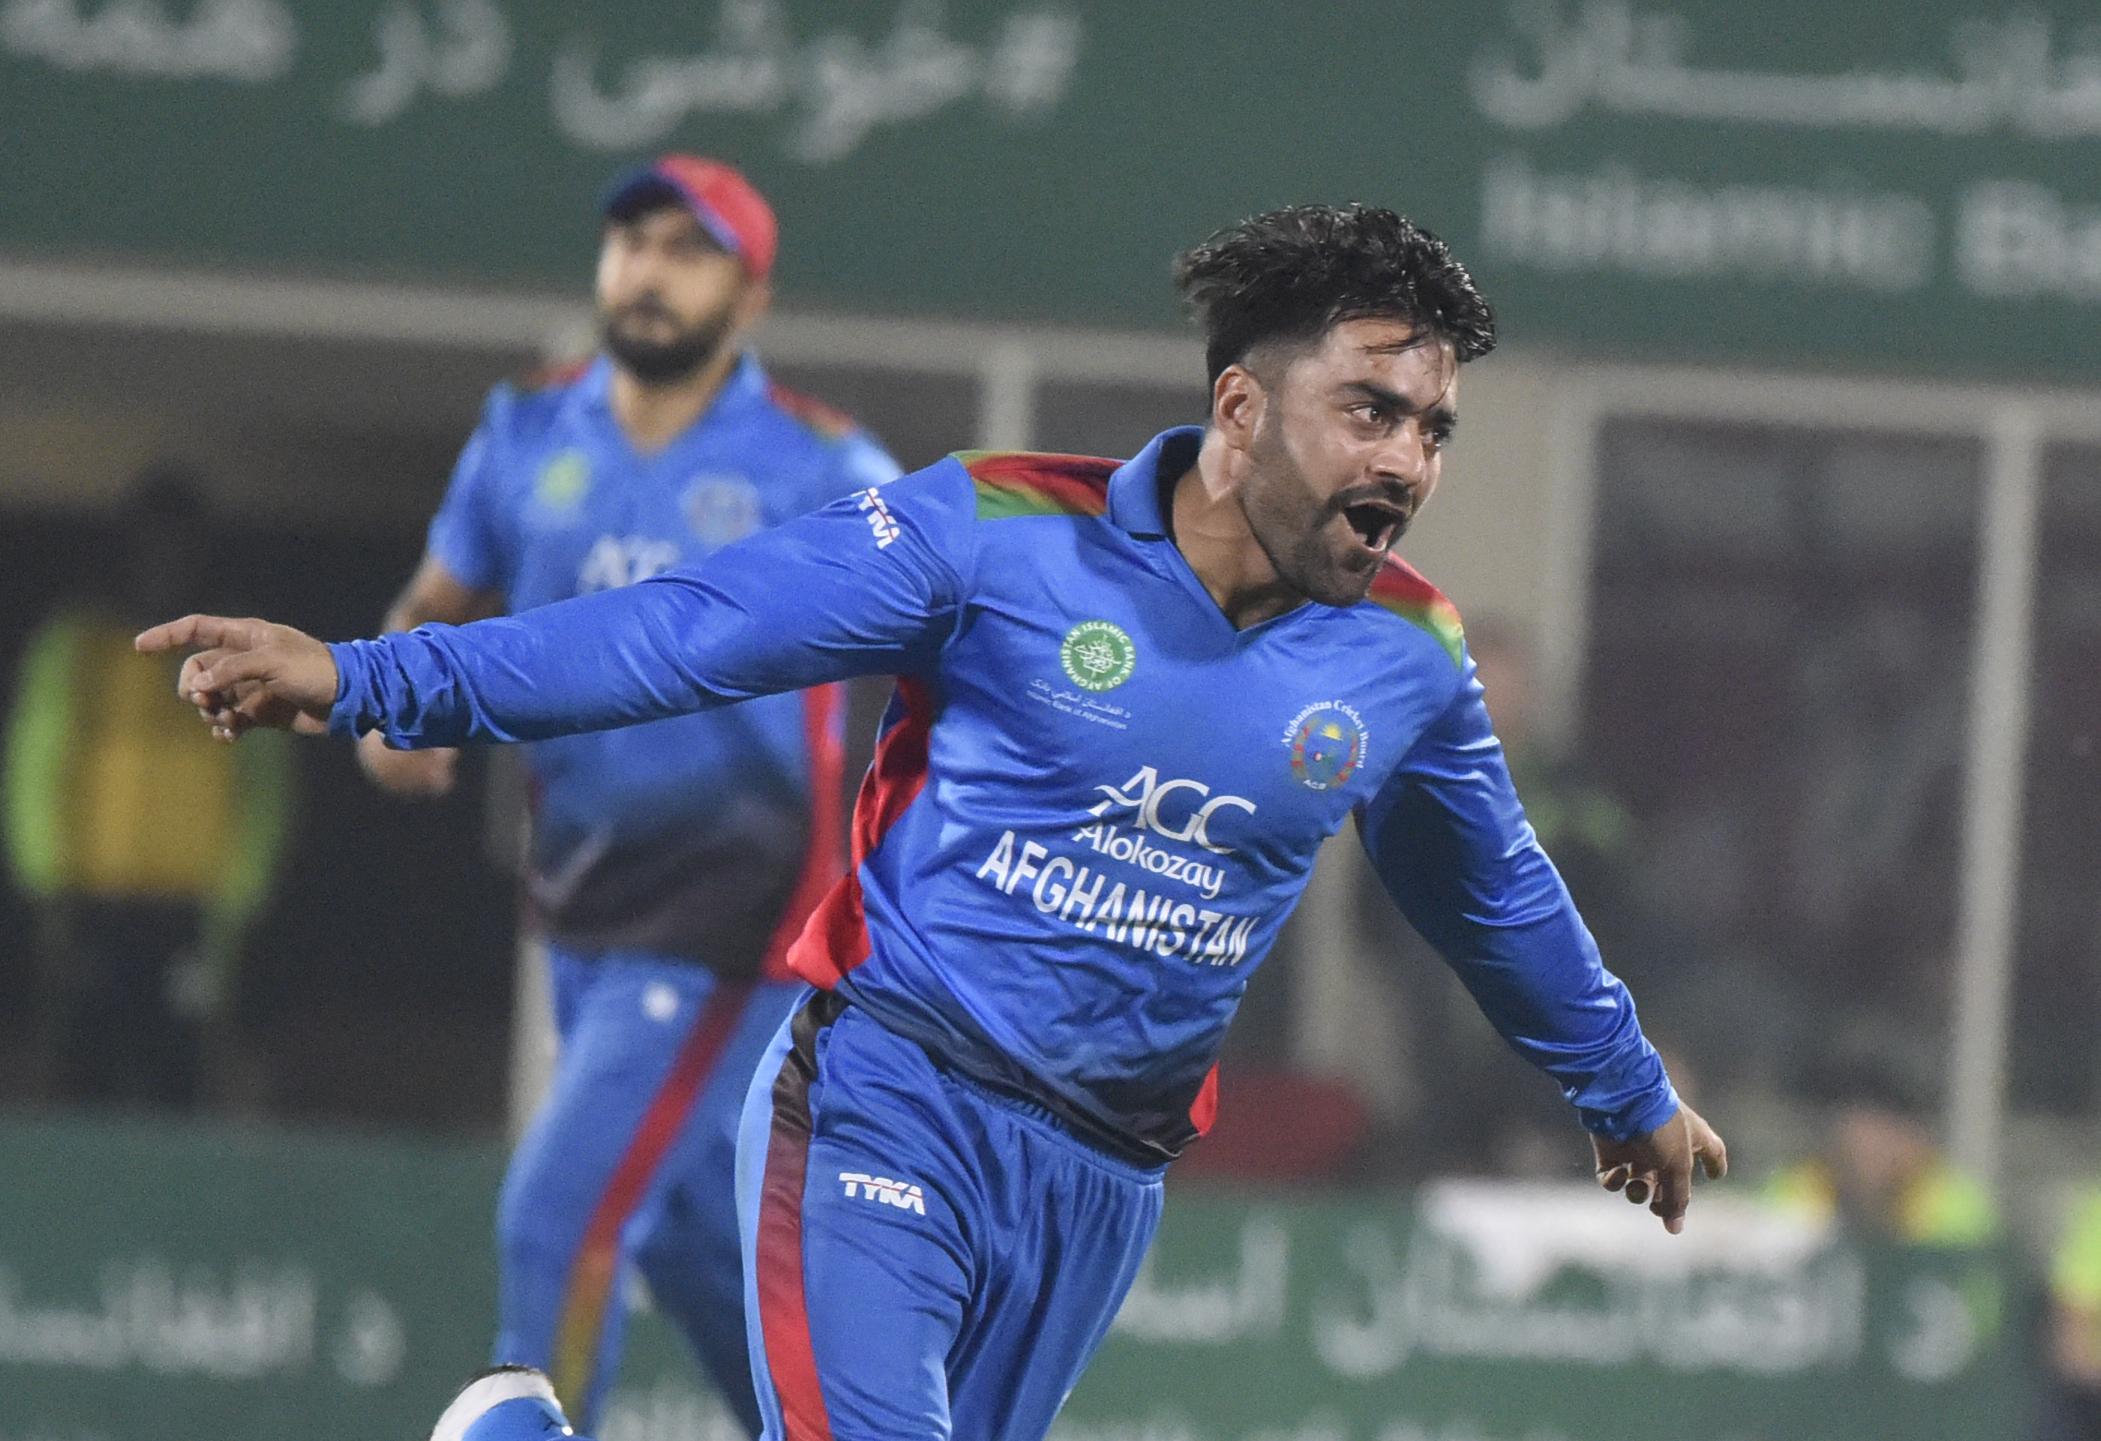 Rashid Khan is set to lead Afghanistan in T20 World Cup 2021 | ICC